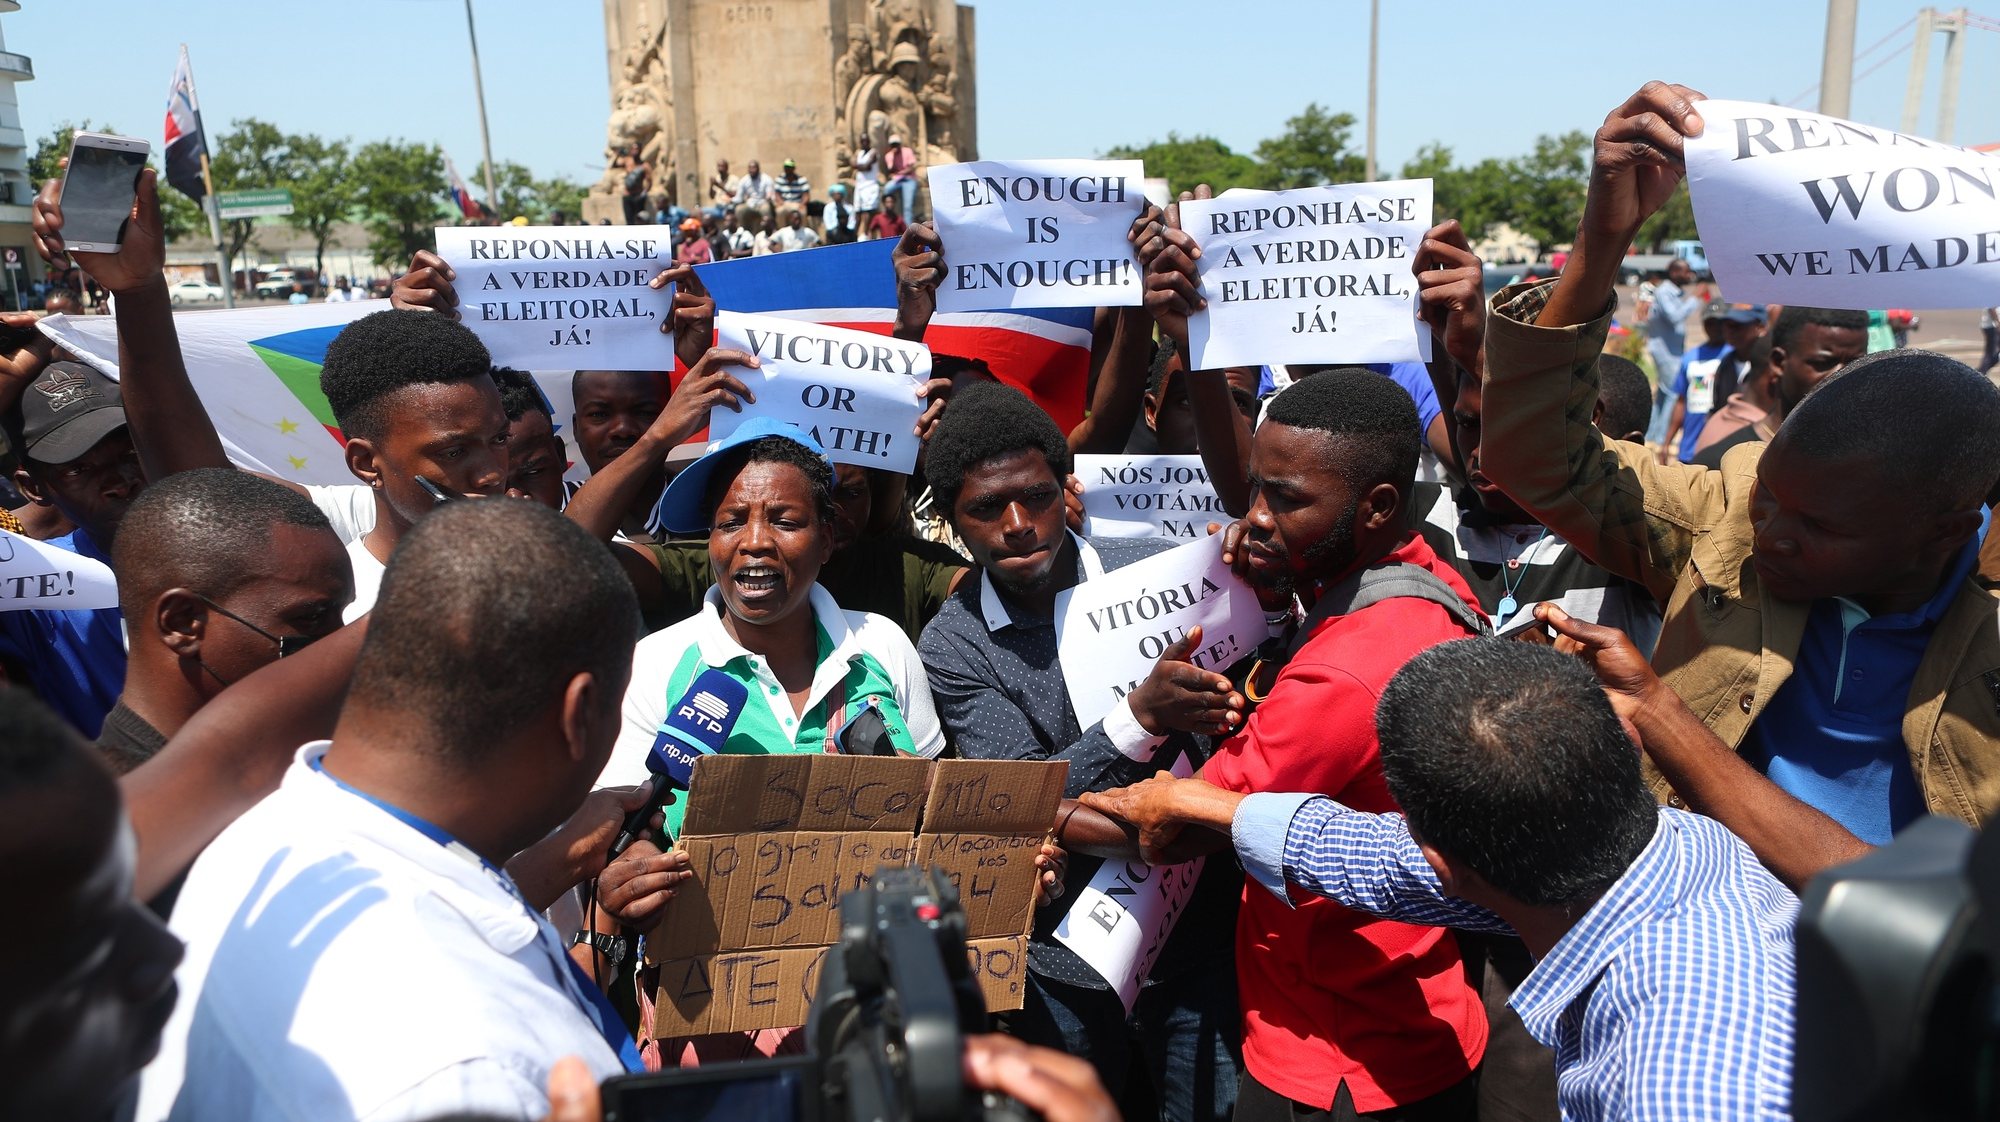 Supporters of the Mozambican National Resistance (Renamo) held a protest march in repudiation of the results of the sixth municipal elections, announced on Thursday by the National Electoral Commission, which gave victory to Frelimo, the ruling party, in 64 municipalities, Maputo, Mozambique, 27 October 2023. LUISA NHANTUMBO/LUSA